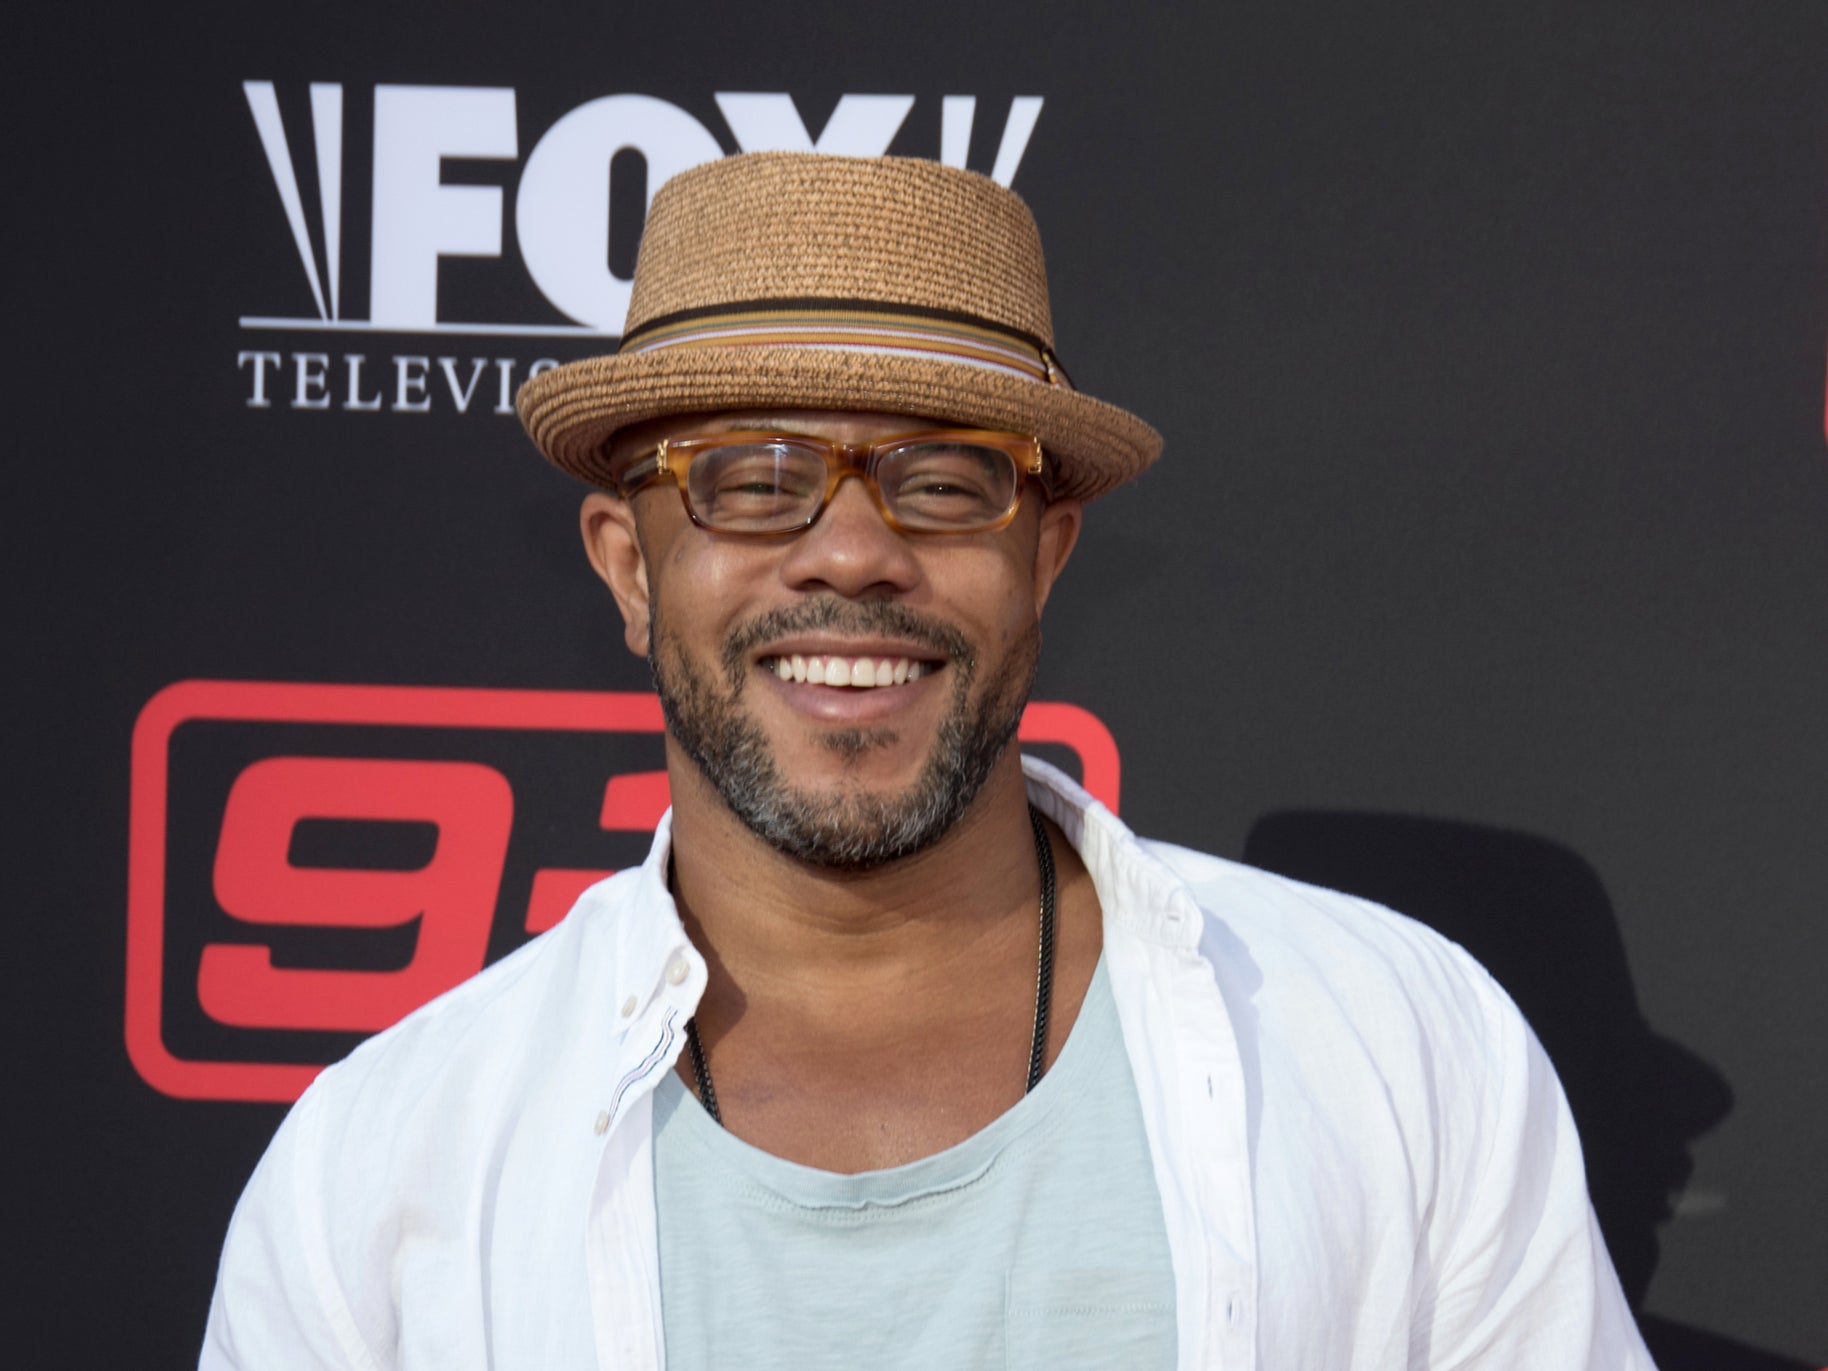 Rockmond Dunbar ‘will not be eligible to work’, according to vaccination rules laid out by 20th Television, who produce ‘9-1-1’